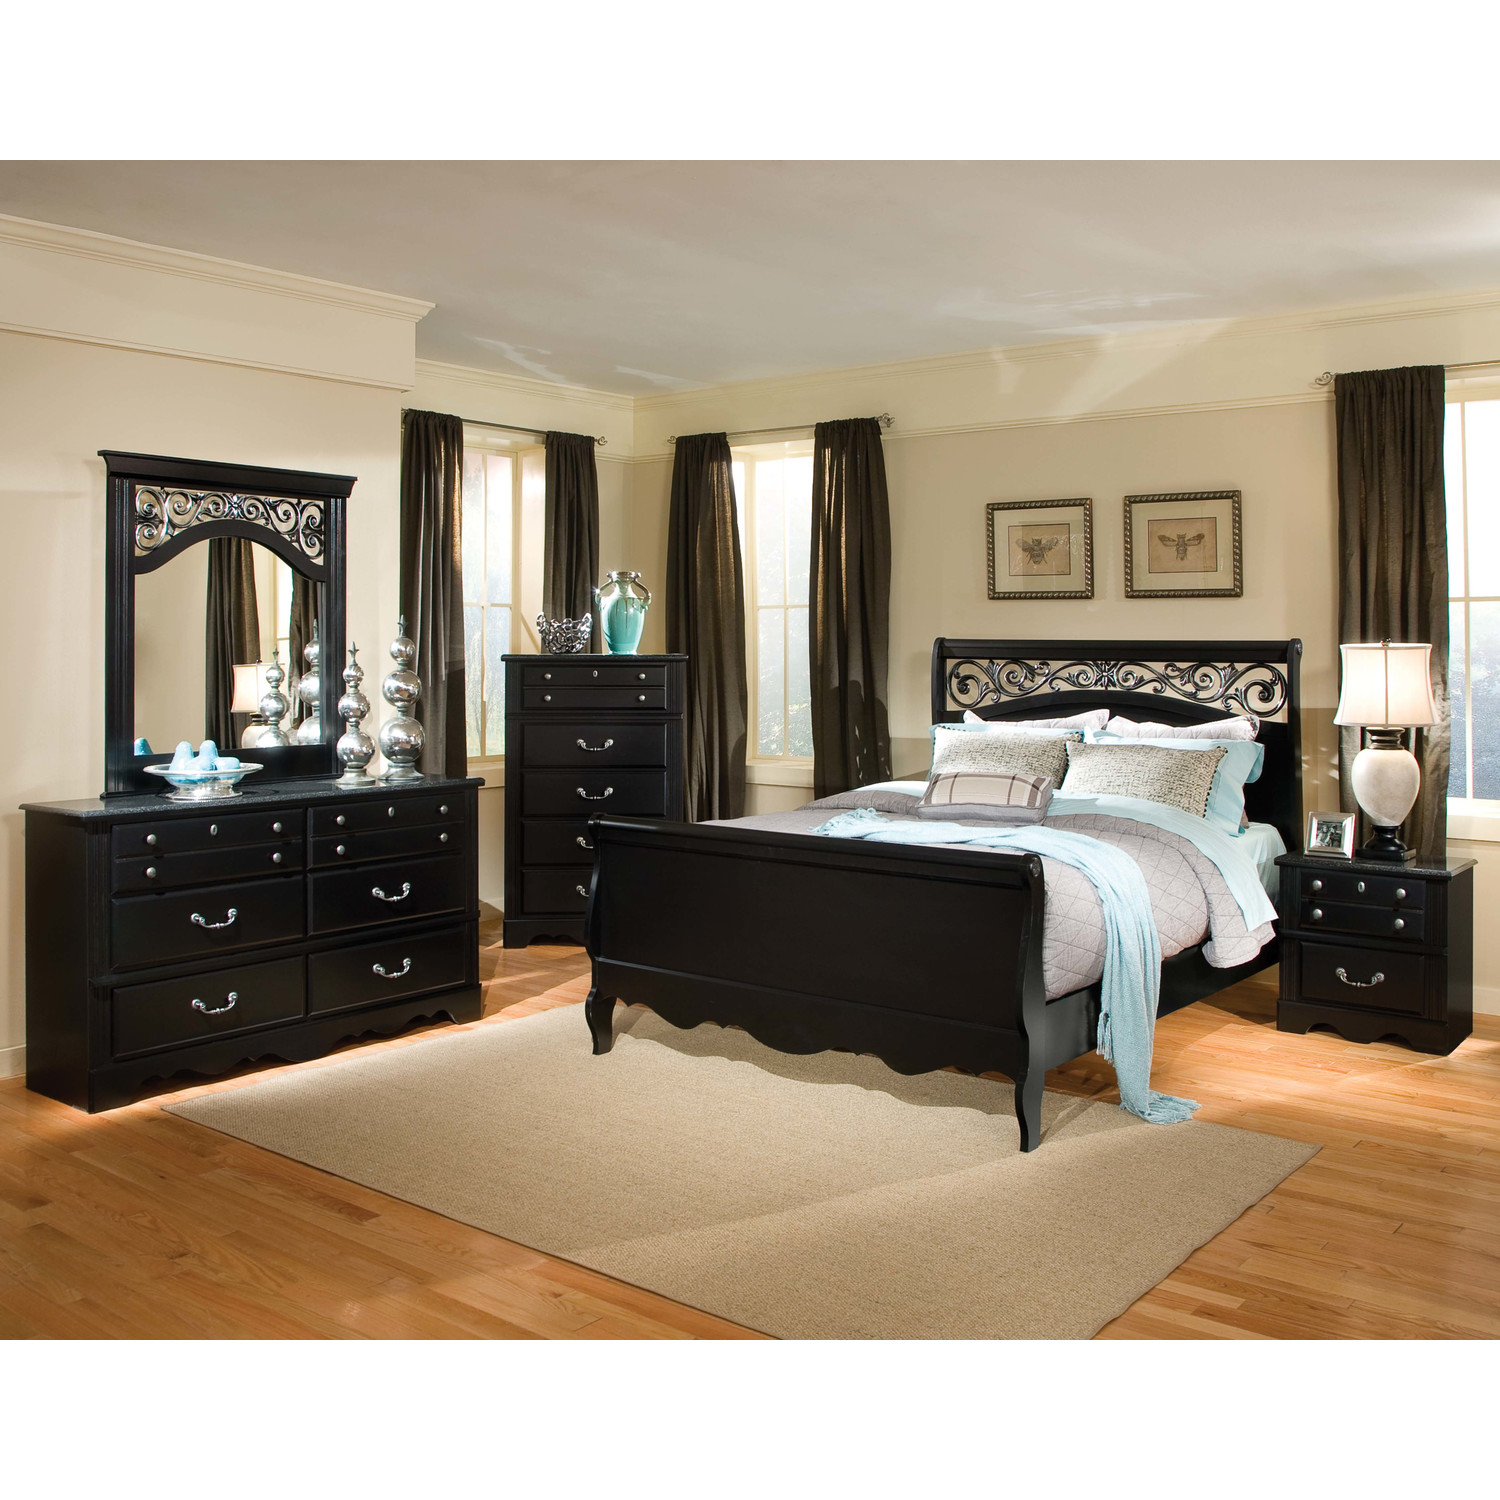 Candice olson bedroom collection